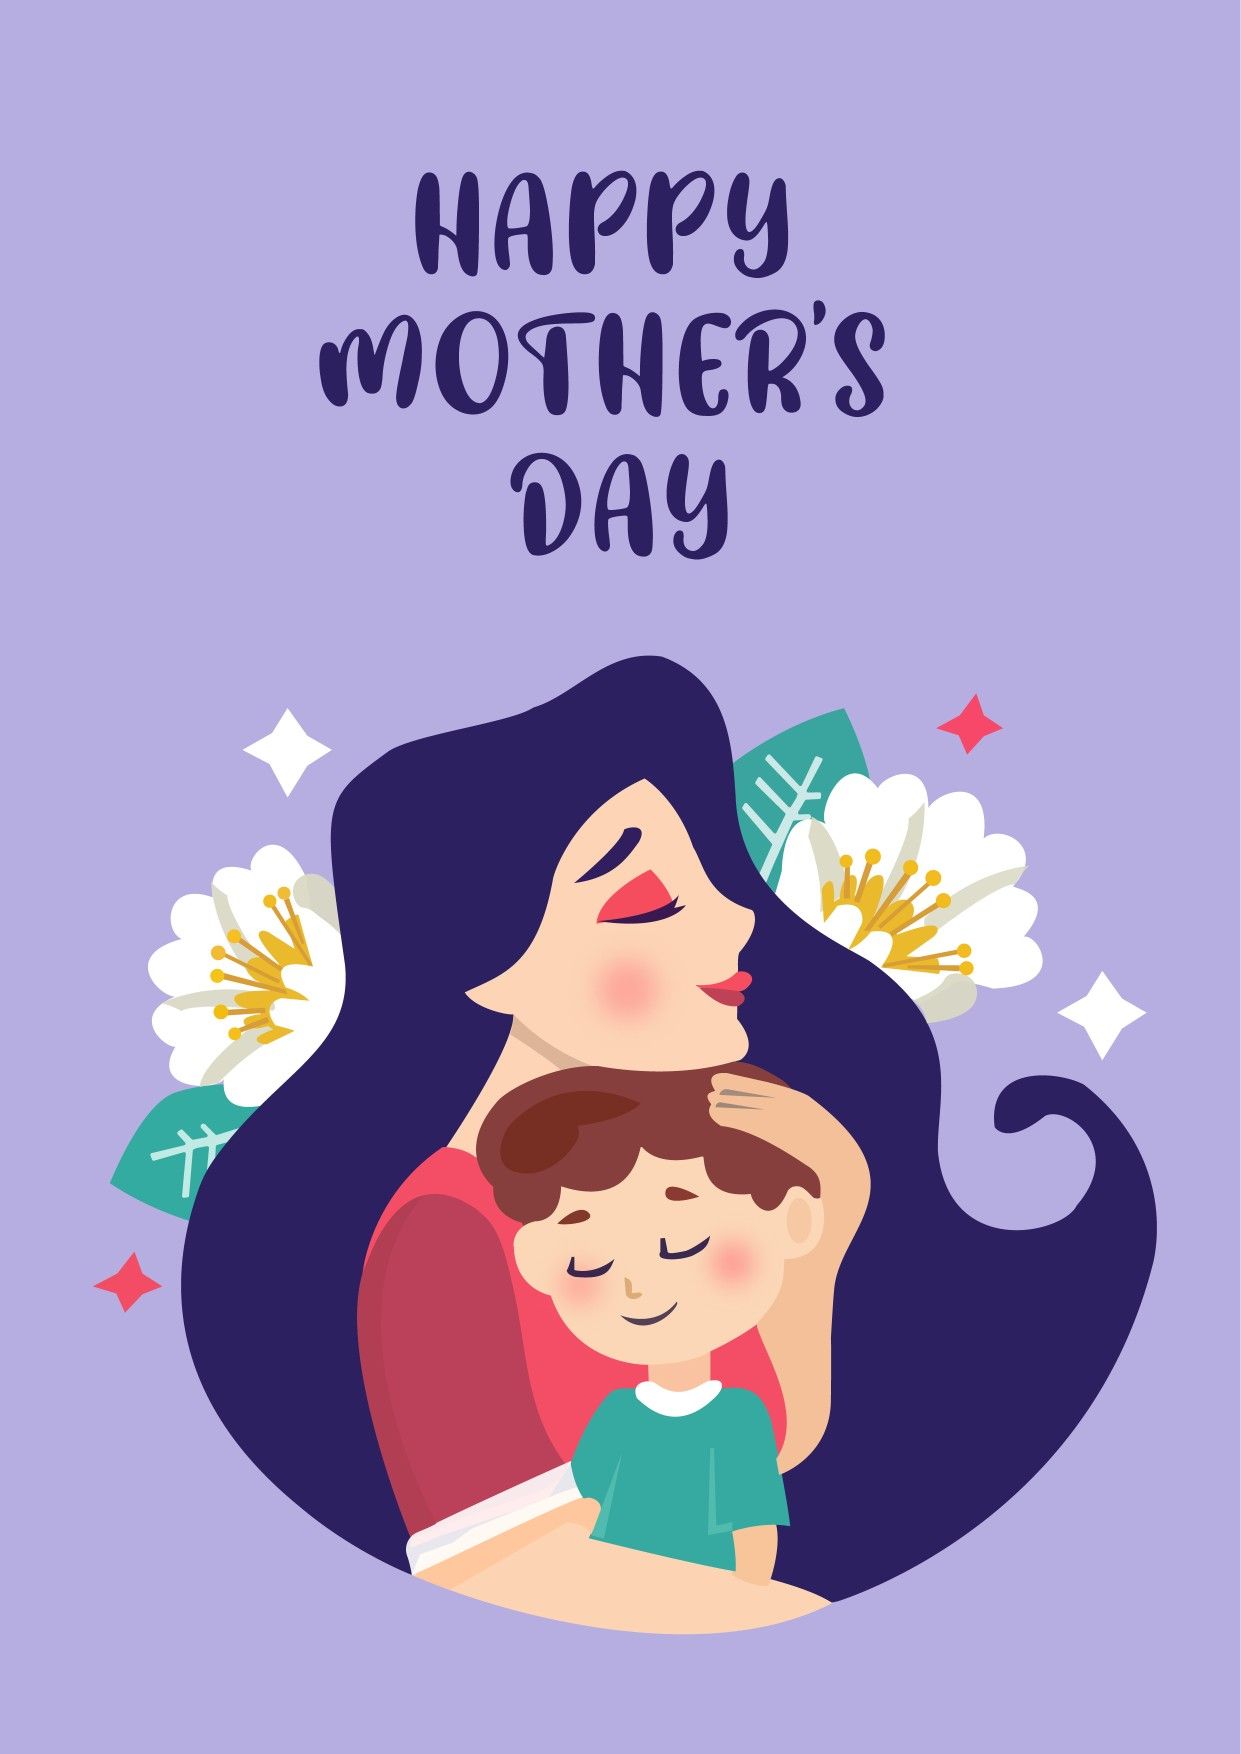 Happy mother's day. Mothers day